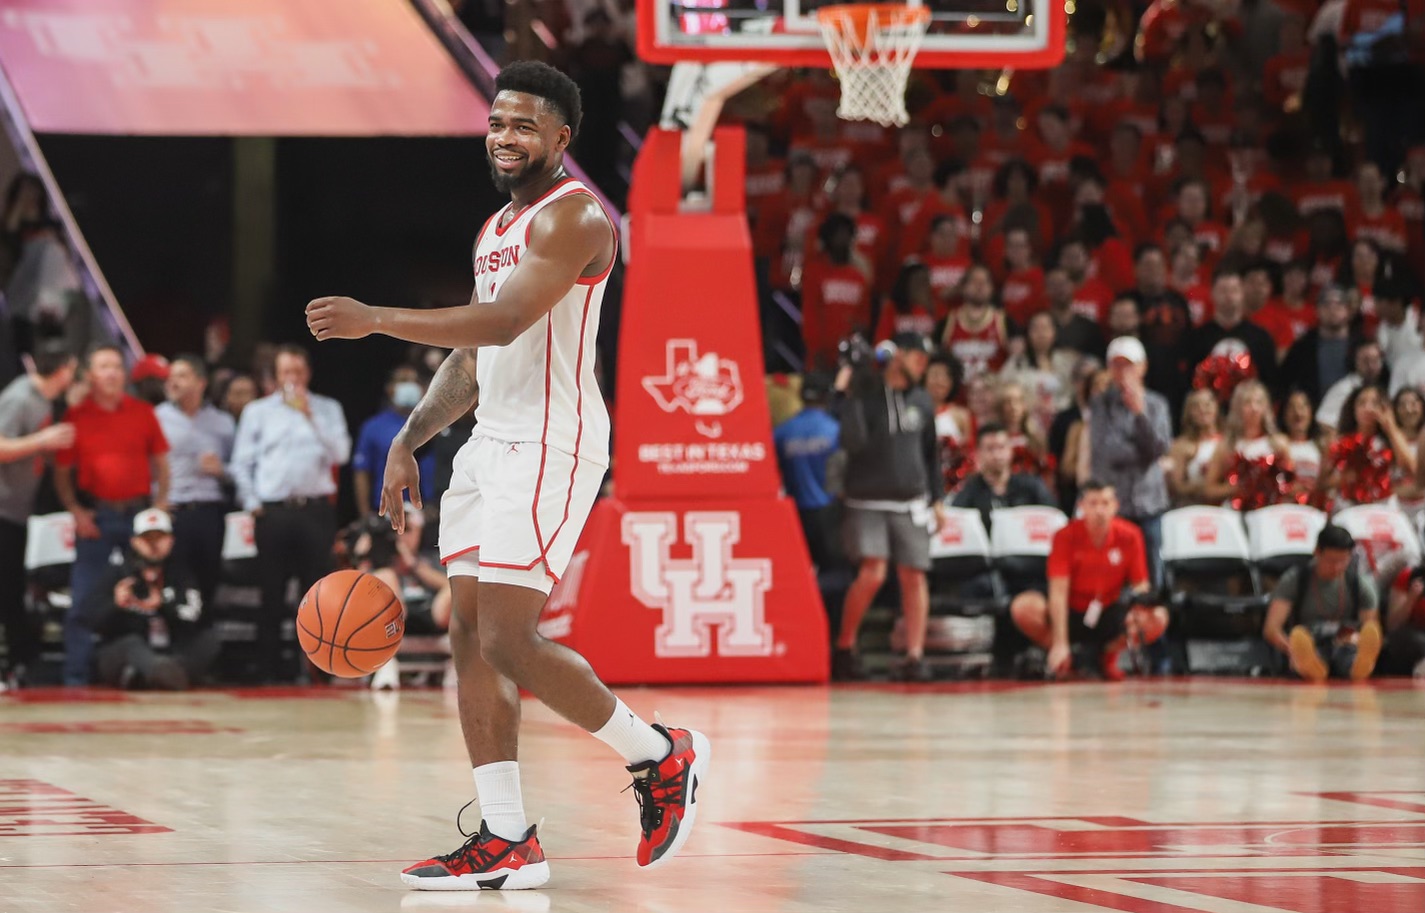 Jamal Shead's buzzer-beater to lift UH over Memphis on Sunday cemented the Cougars as the No. 1 team in the AP poll to finish the regular season. | Anh Le/The Cougar